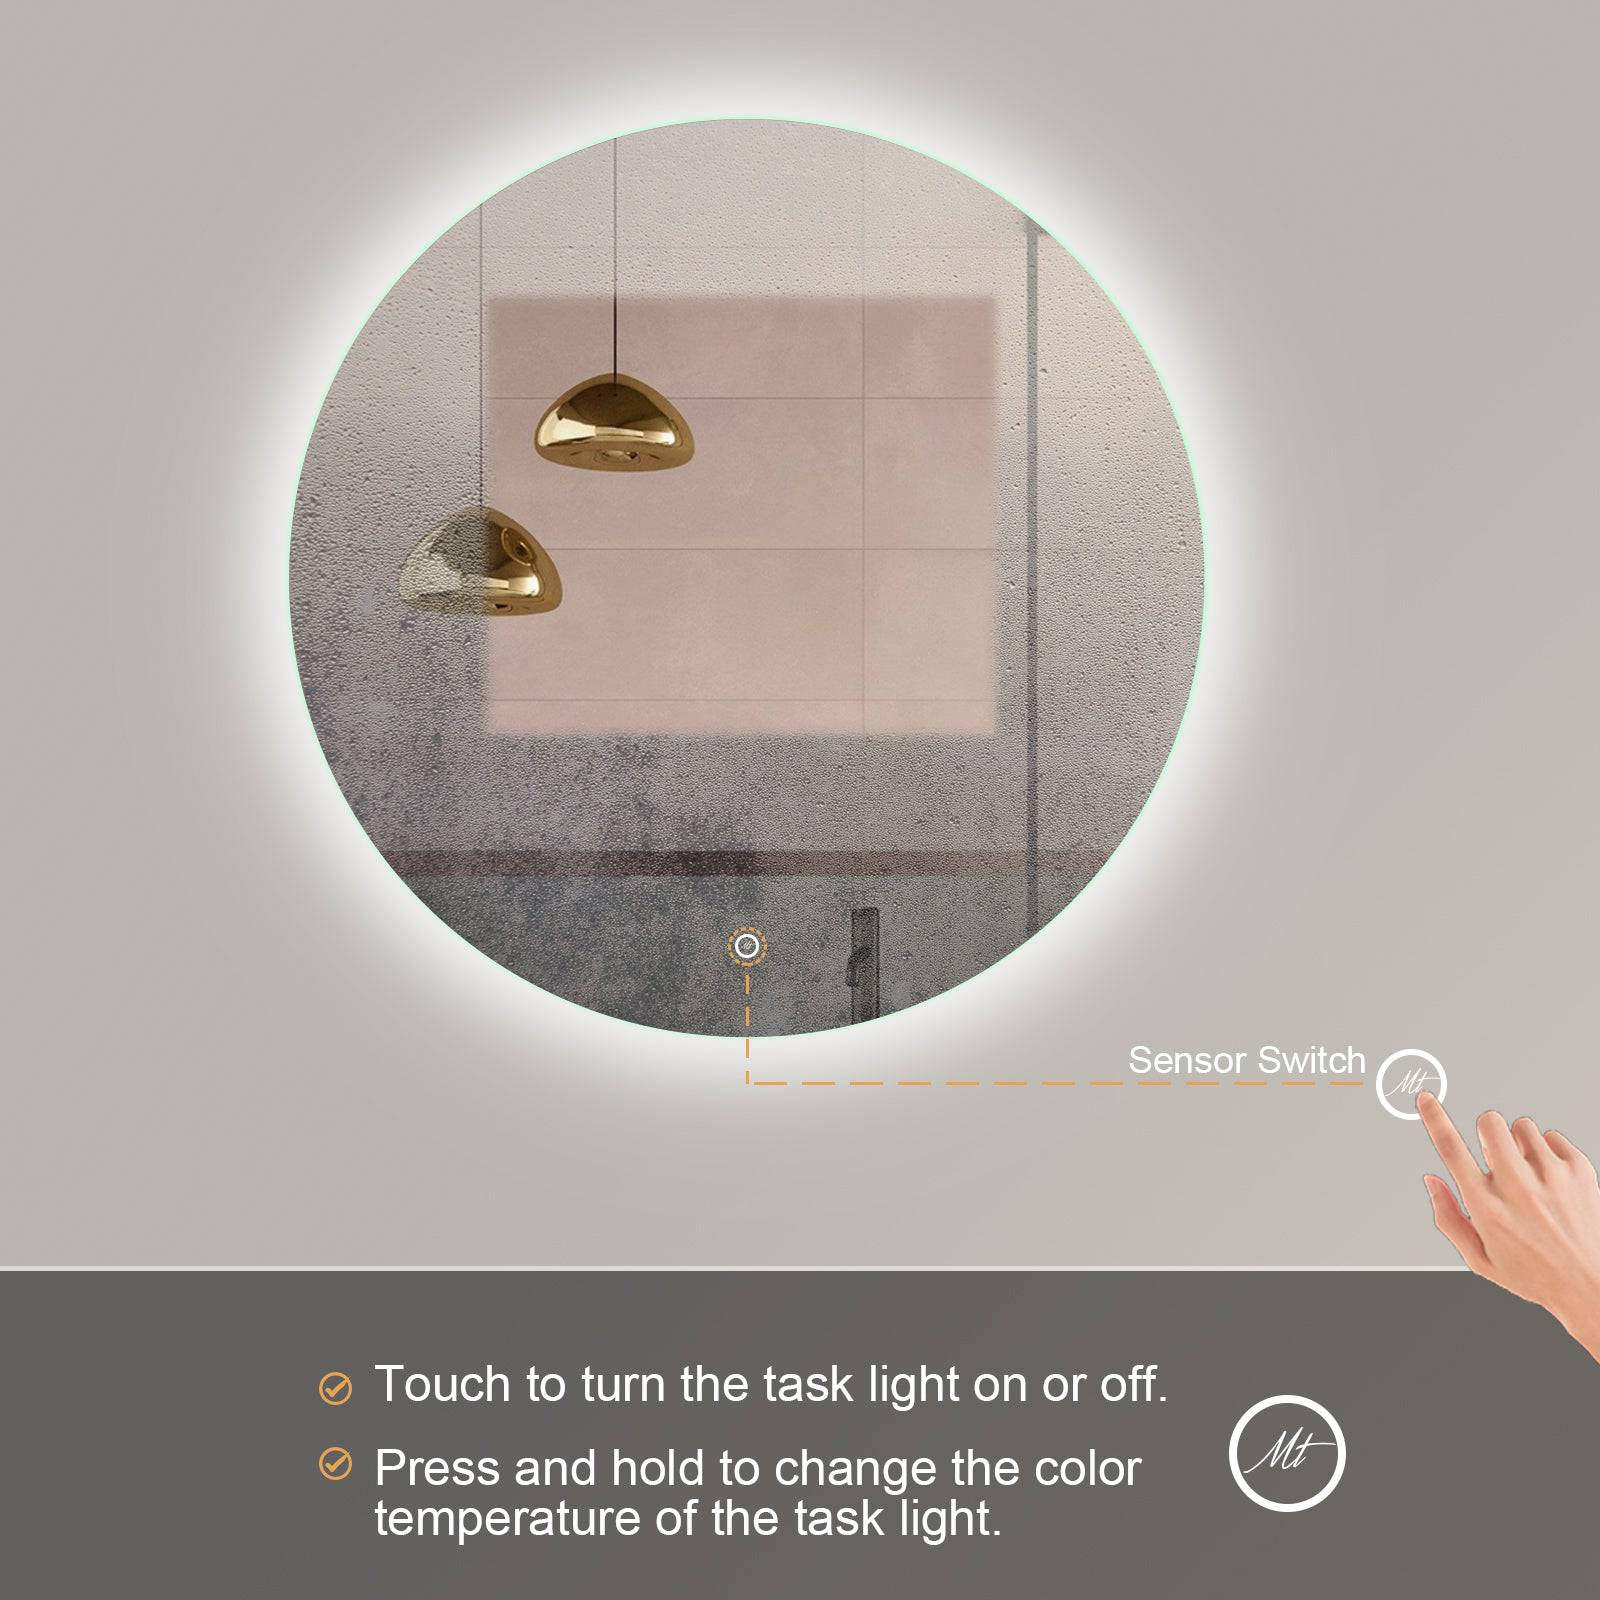 ELL Jupiter Series - LED Wall Glow Mirror with Defogger - 5mm Copper-Free  Glass, Circular Design, Adjustable Color Temperature, Touch Switch - ETL